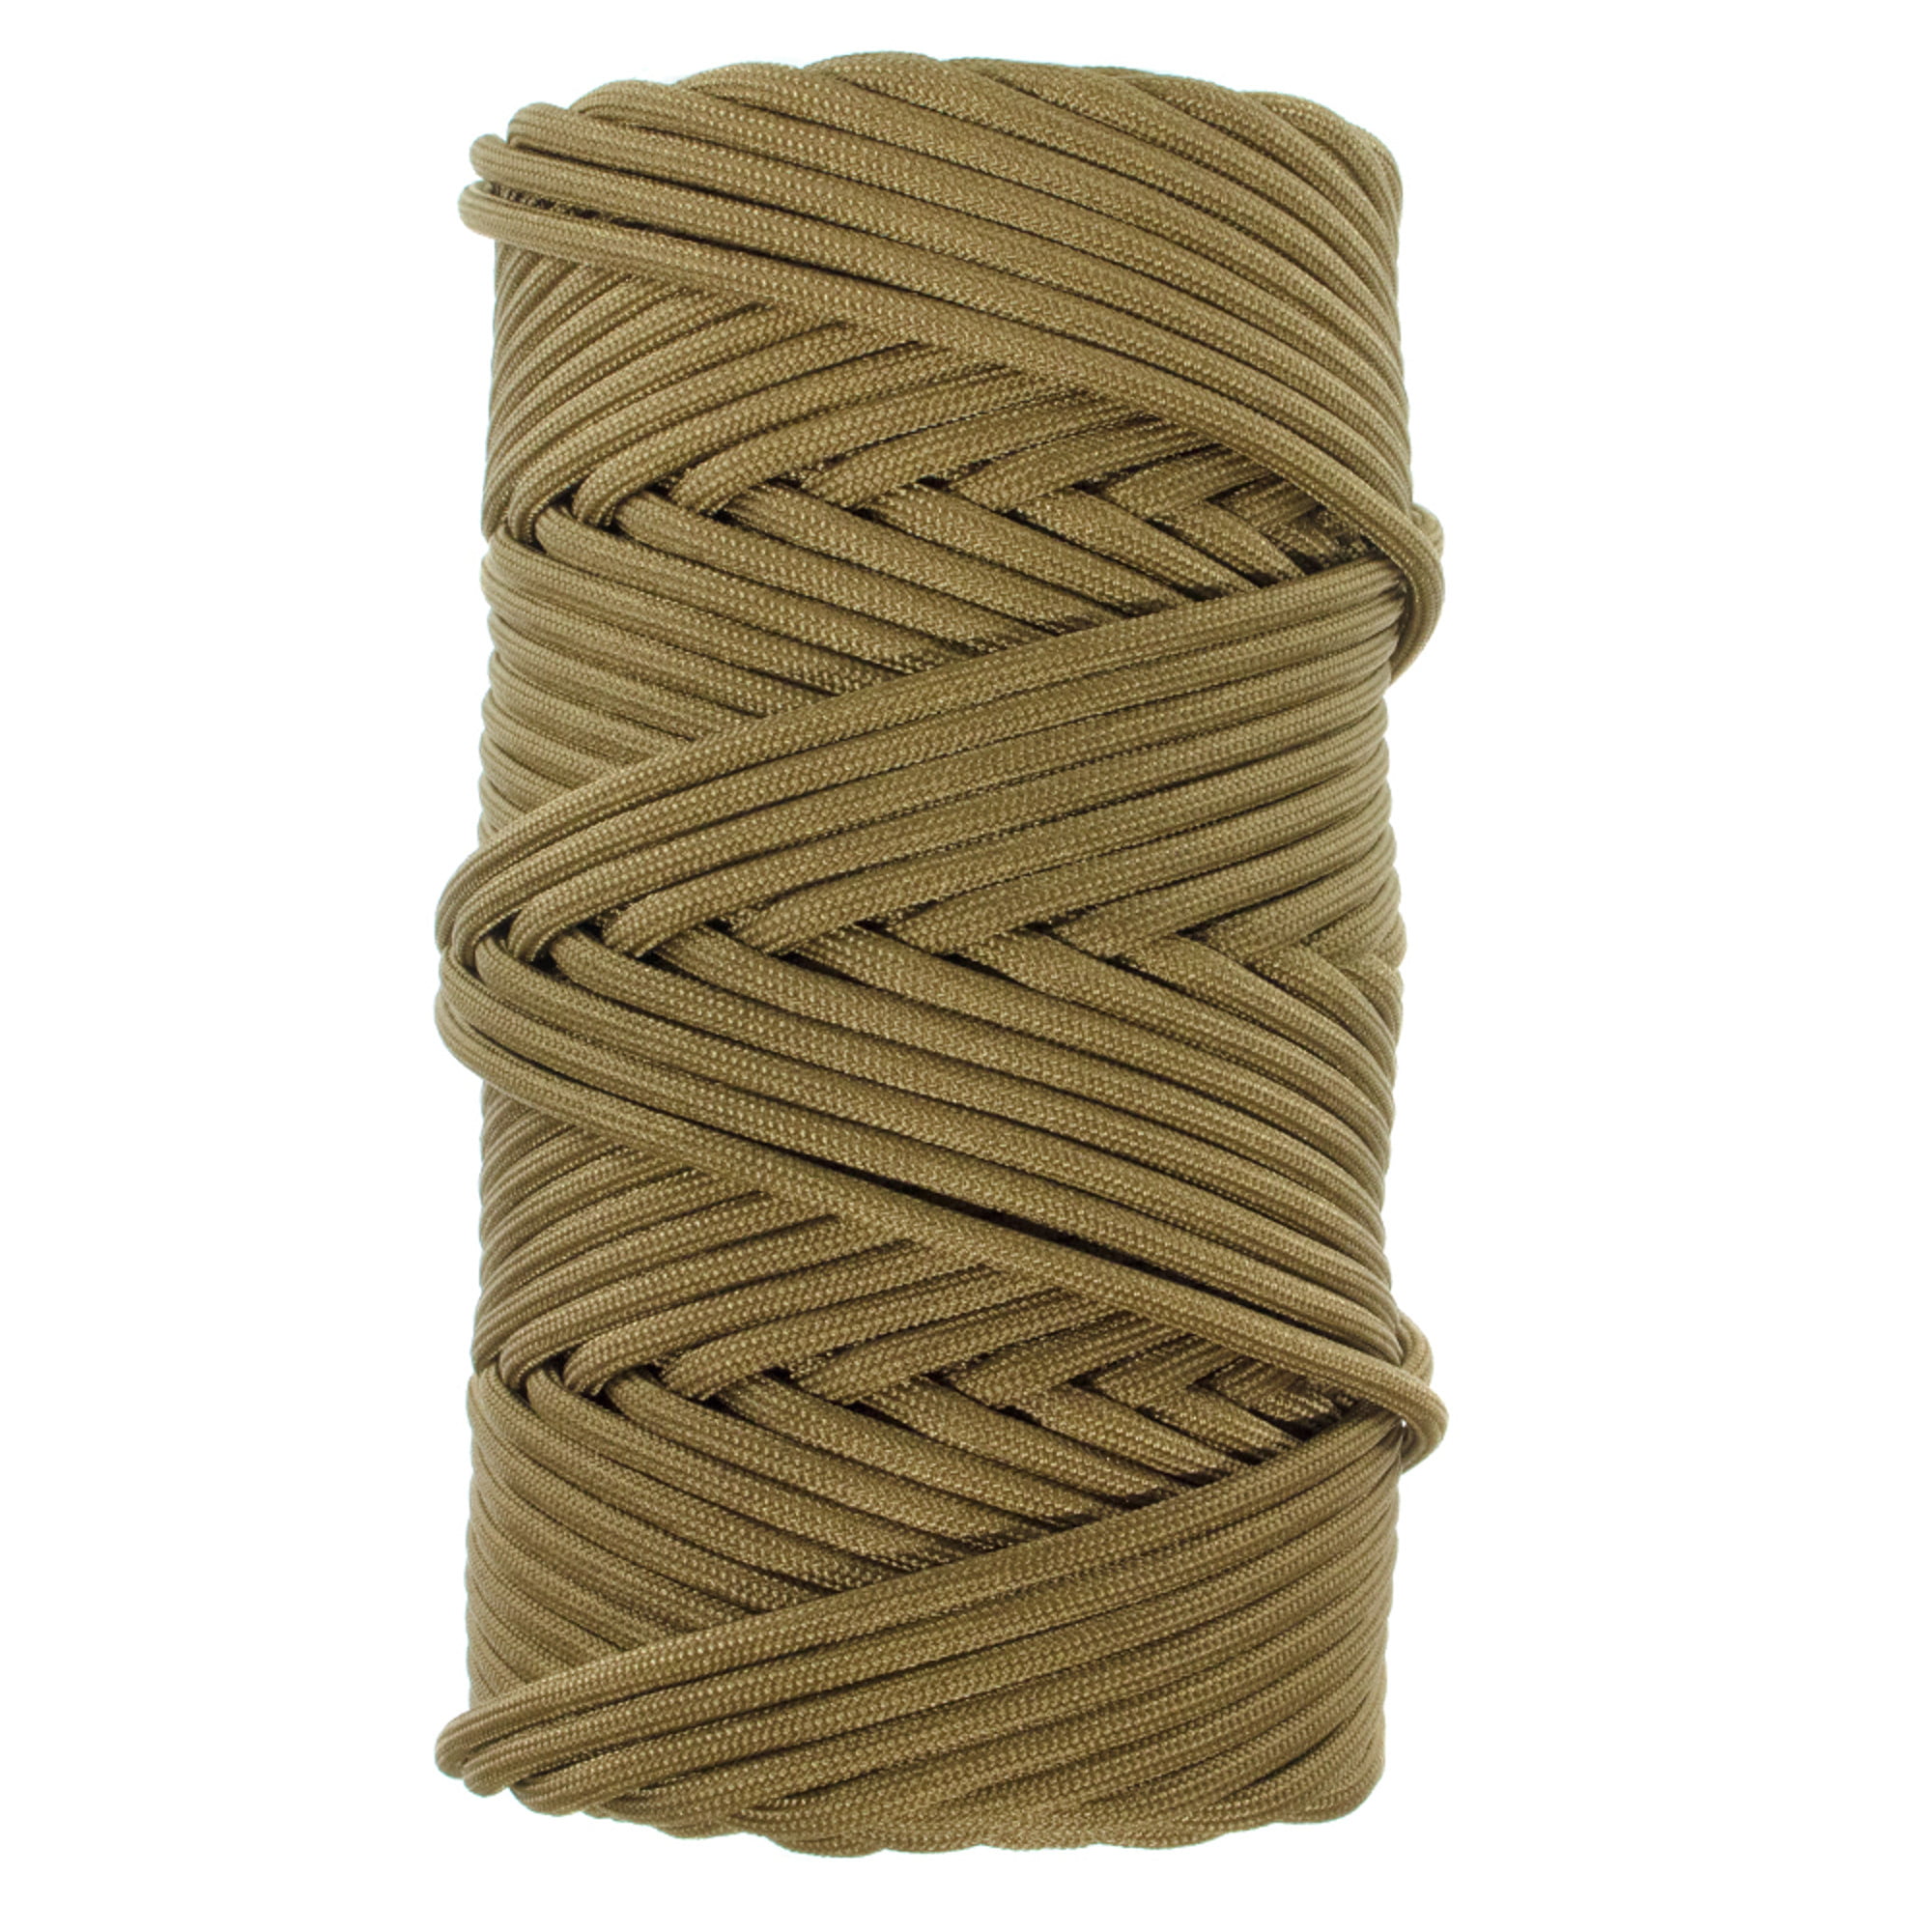 Authentic Mil-Spec Type II MIL-C-5040-H Paracord GOLBERG 550lb Parachute Cord Paracord Used by The US Military… 100% Nylon Mil-Spec Type III Paracord 